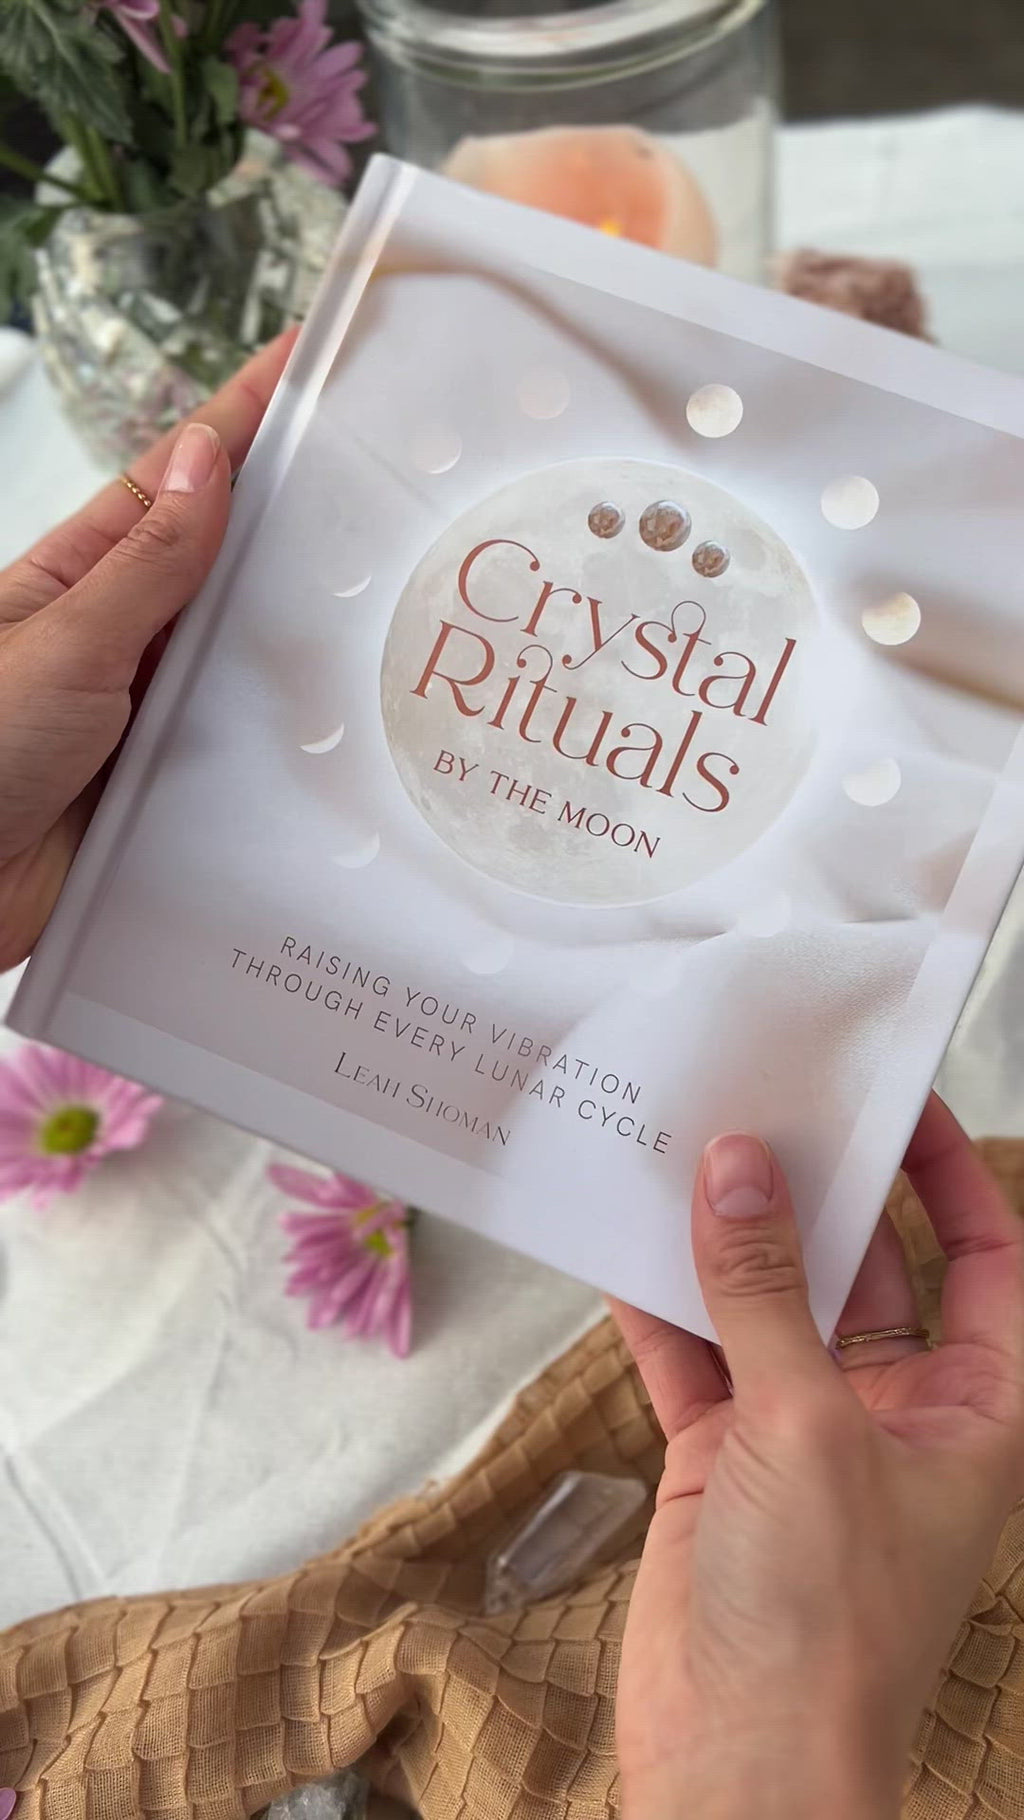 Crystal Rituals by the Moon has been created as not only as a guide for beginners, but for seasoned crystal collectors and healers. Leah Shoman has used her own crystal healing journey to inspire and motivate the collective into connecting to their own intuition and Source on a deeper, more authentic level. 